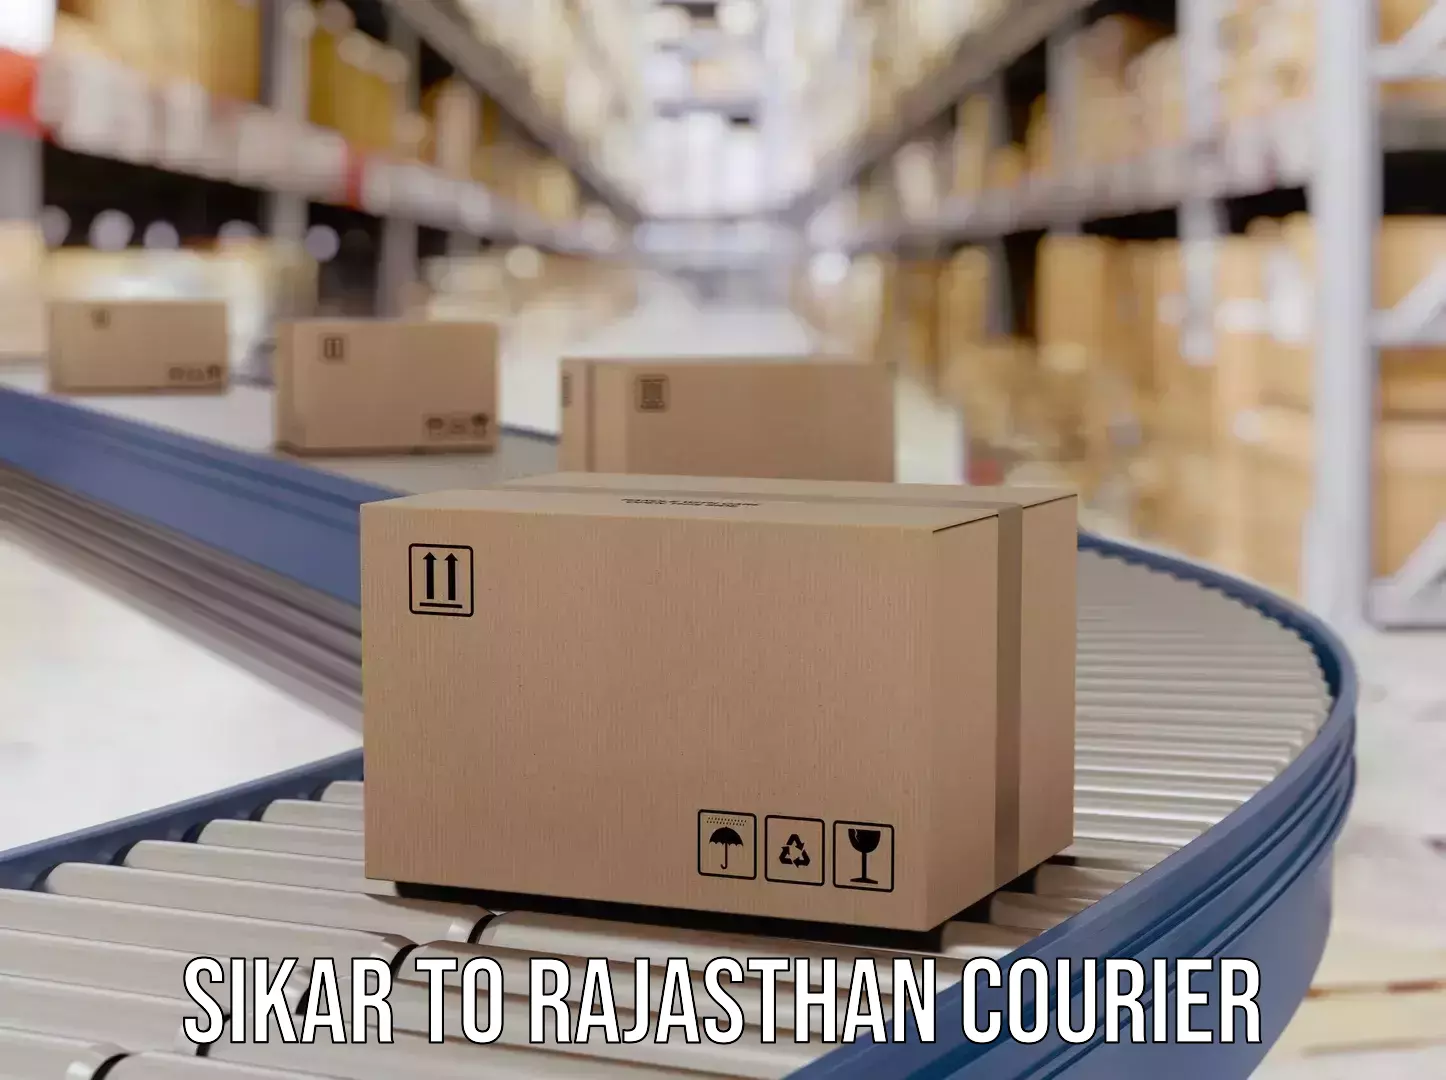 Efficient parcel tracking Sikar to Udaipur